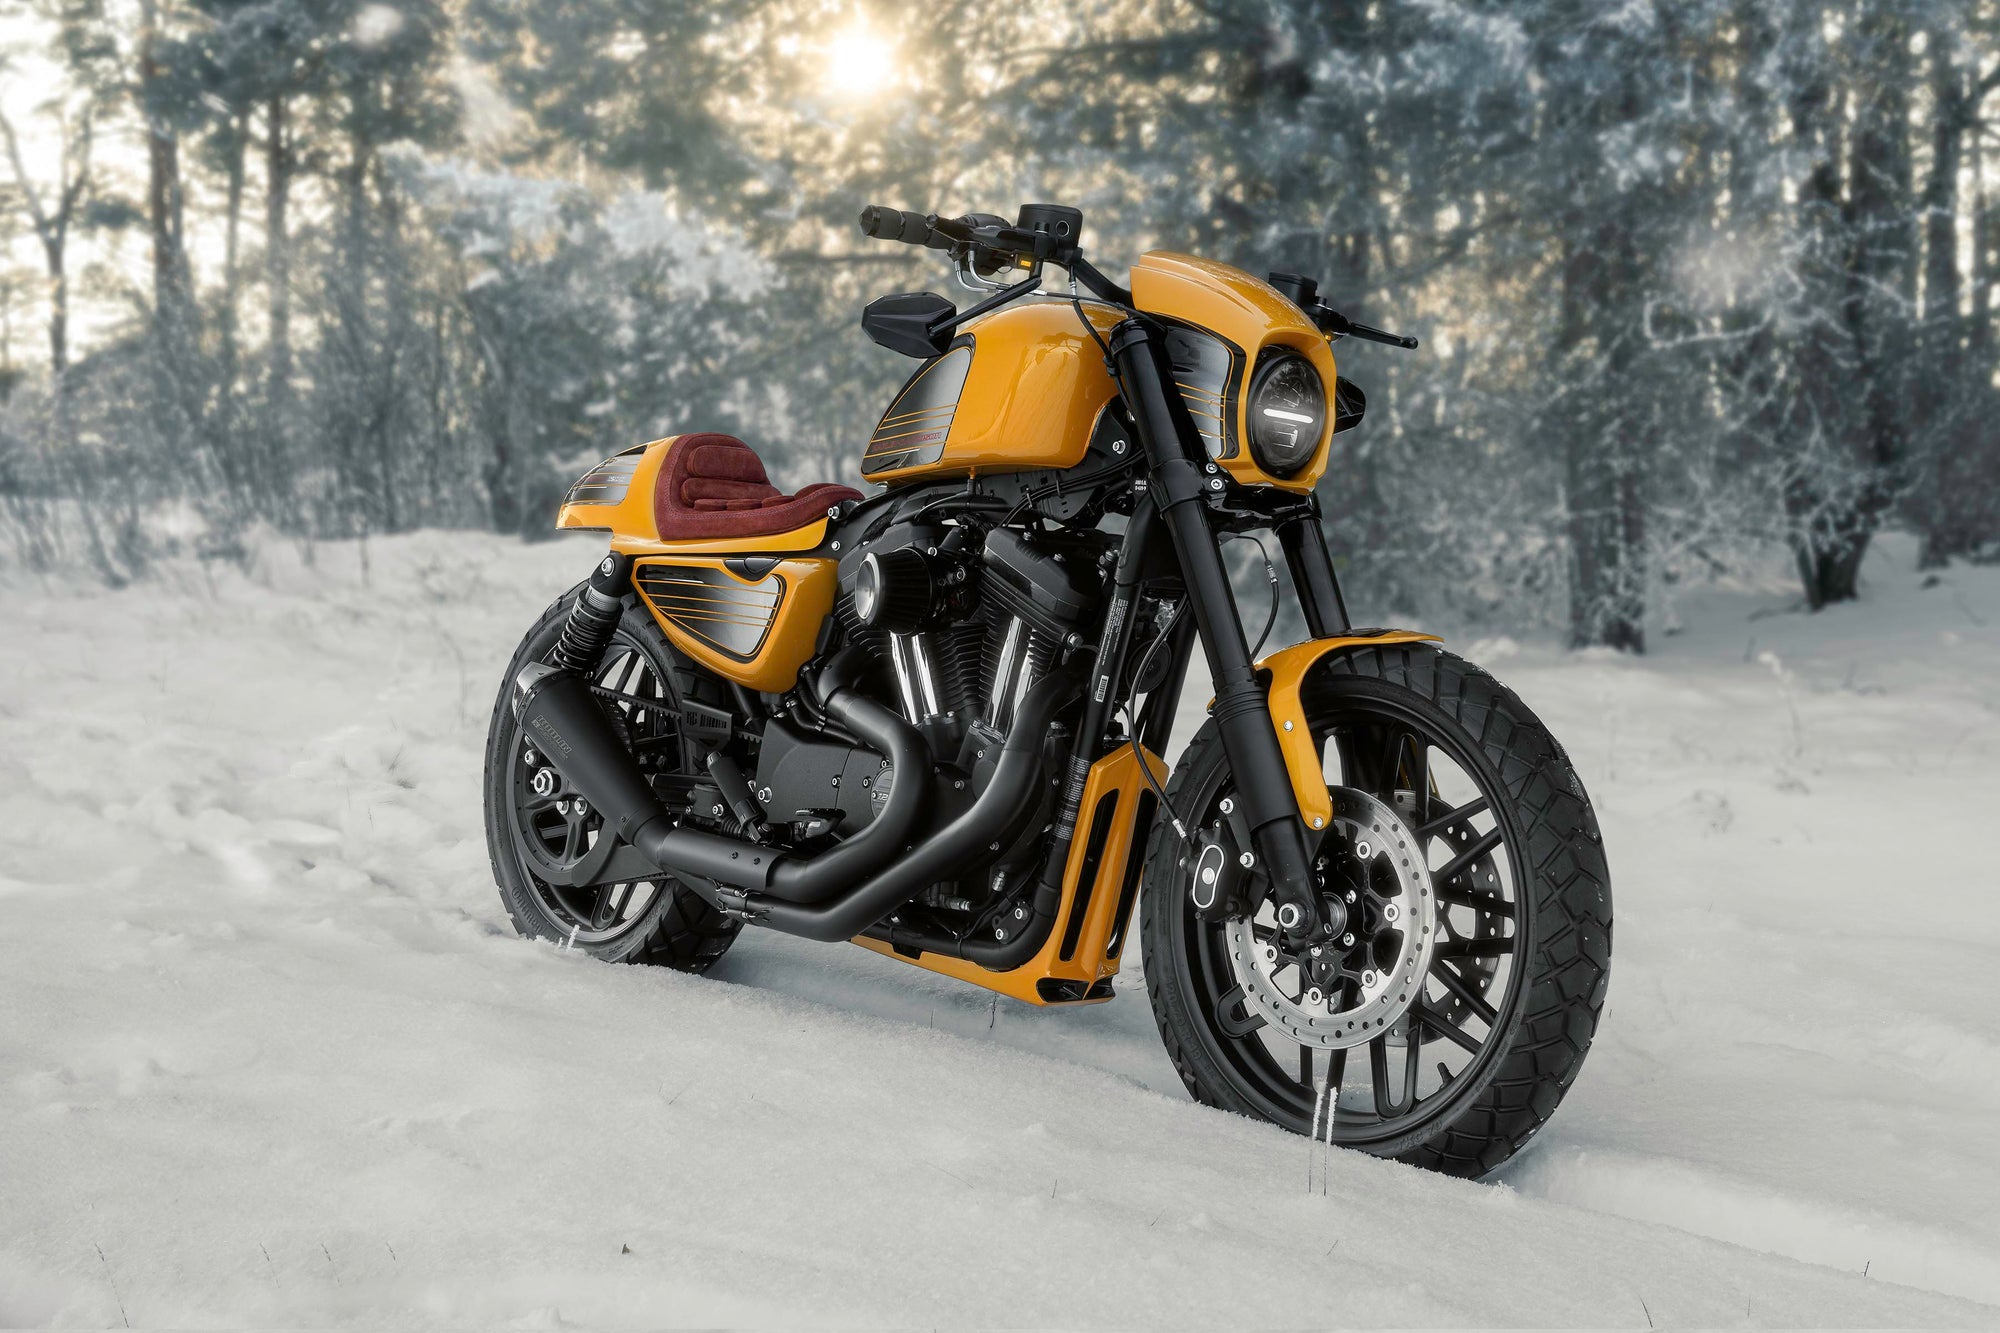 Harley Davidson motorcycle with Killer Custom parts from the side outside on a sunny winter day with some snowy trees in the background